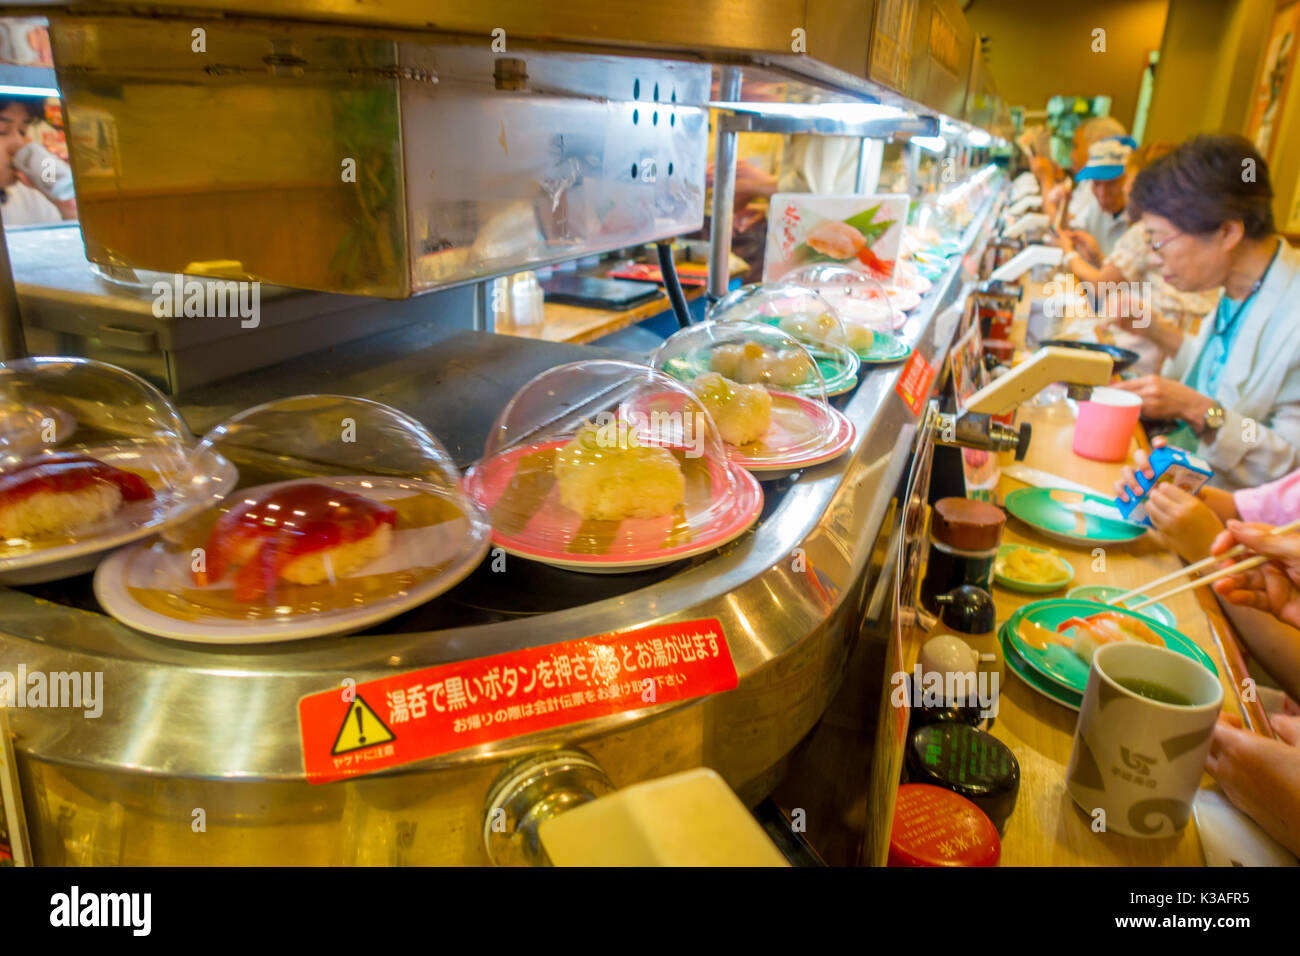 TOKYO, JAPAN -28 JUN 2017: Unidentified people eating an assorted japanesse food over a table, inside of a kaitenzushi conveyor belt sushi restaurant. Consumers pile up colored empty plates when they are finished eating, in Tokyo Stock Photo